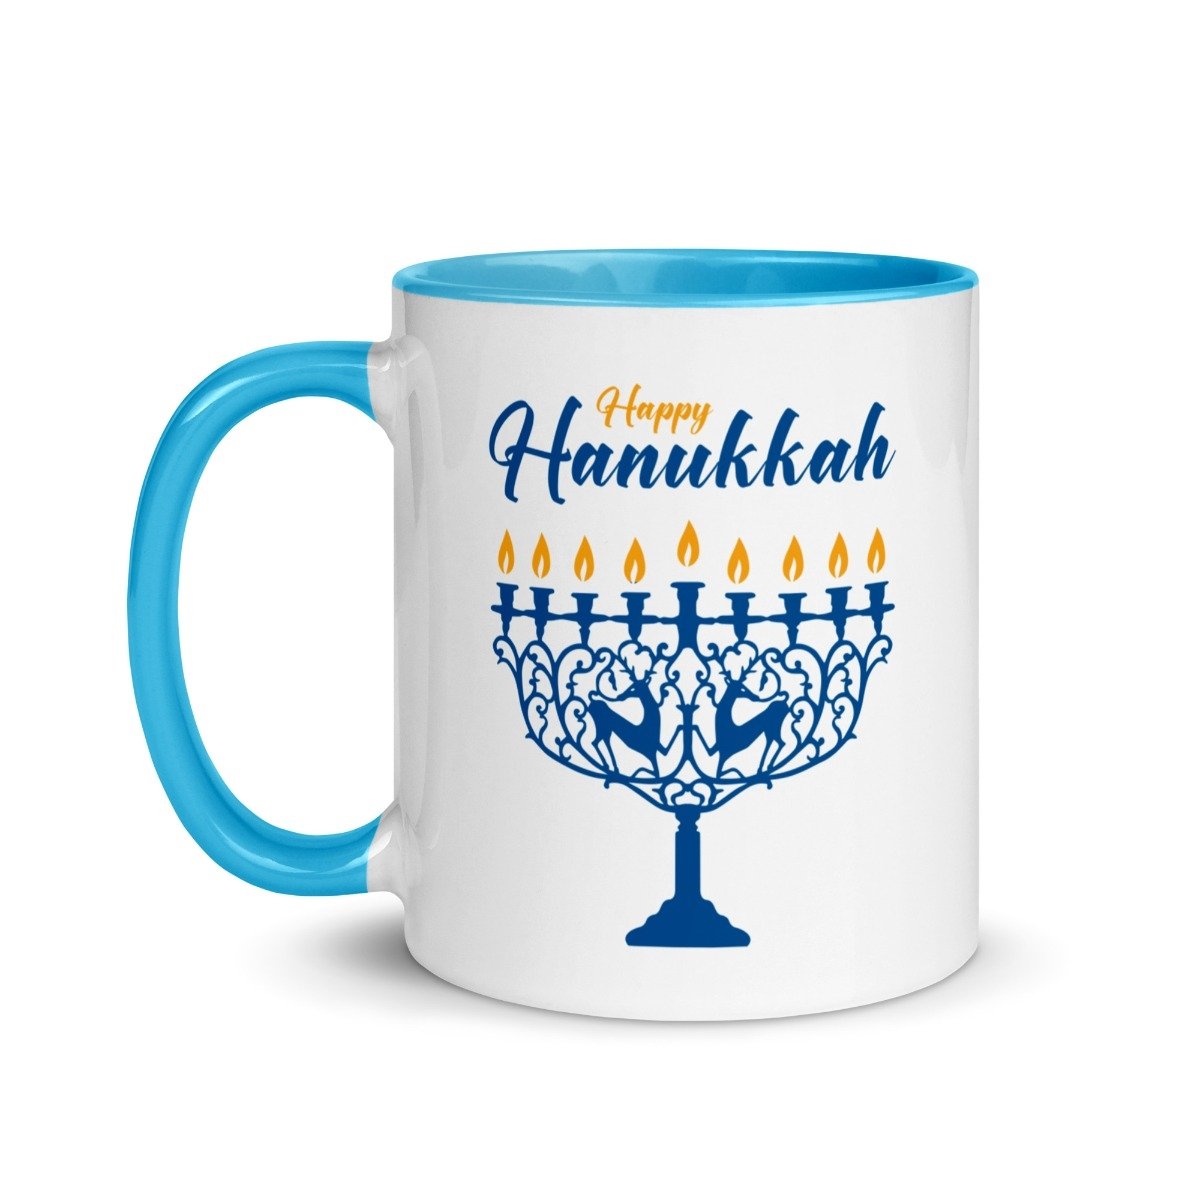 Hanukkah Gift Ideas for Your Jewish Coworkers